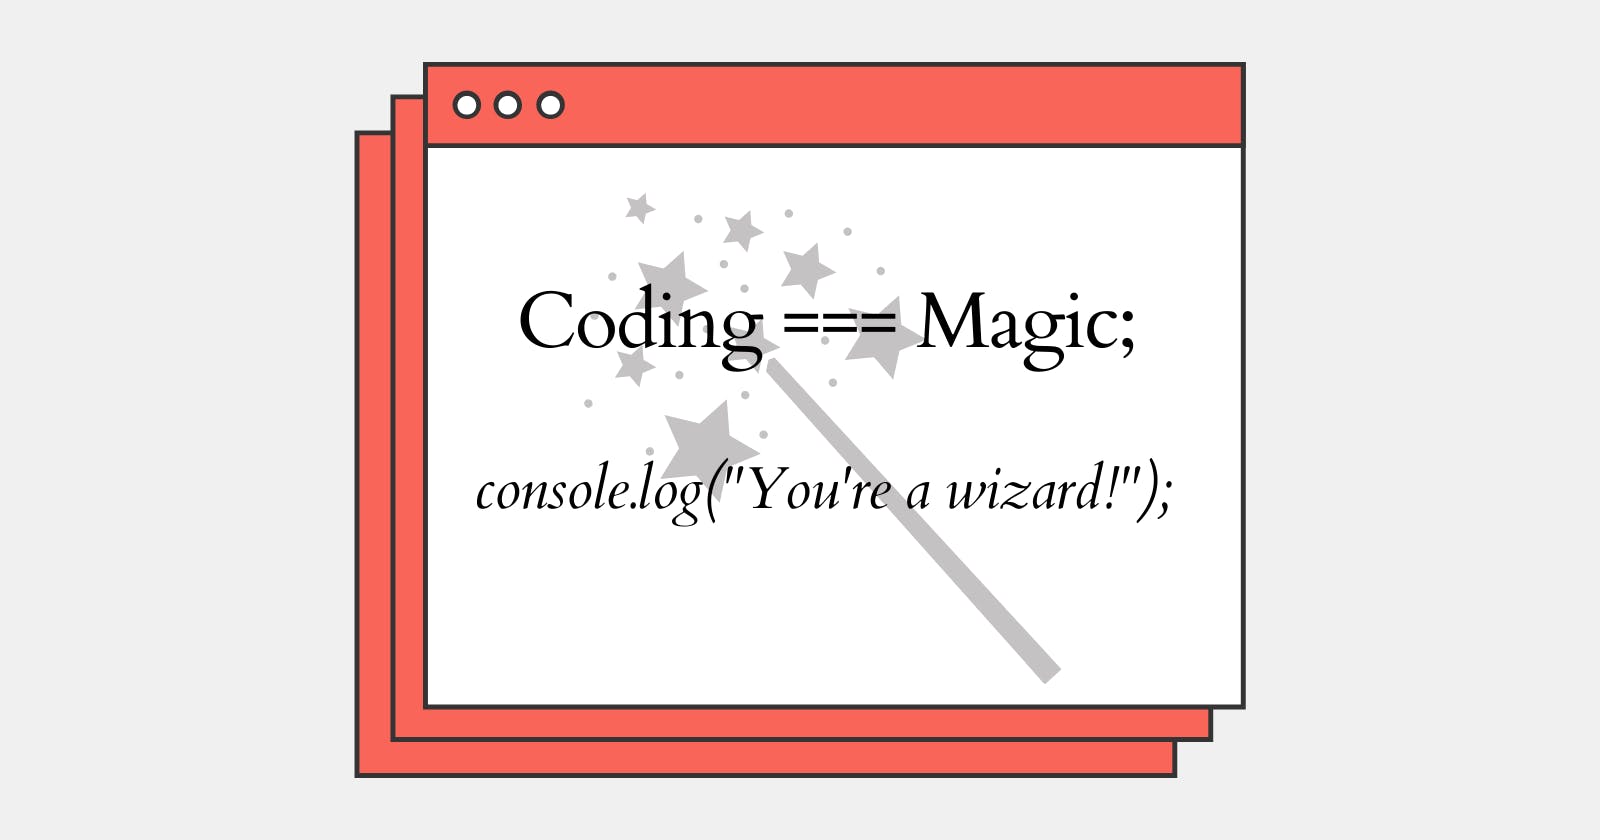 This image reads: Coding is magical!